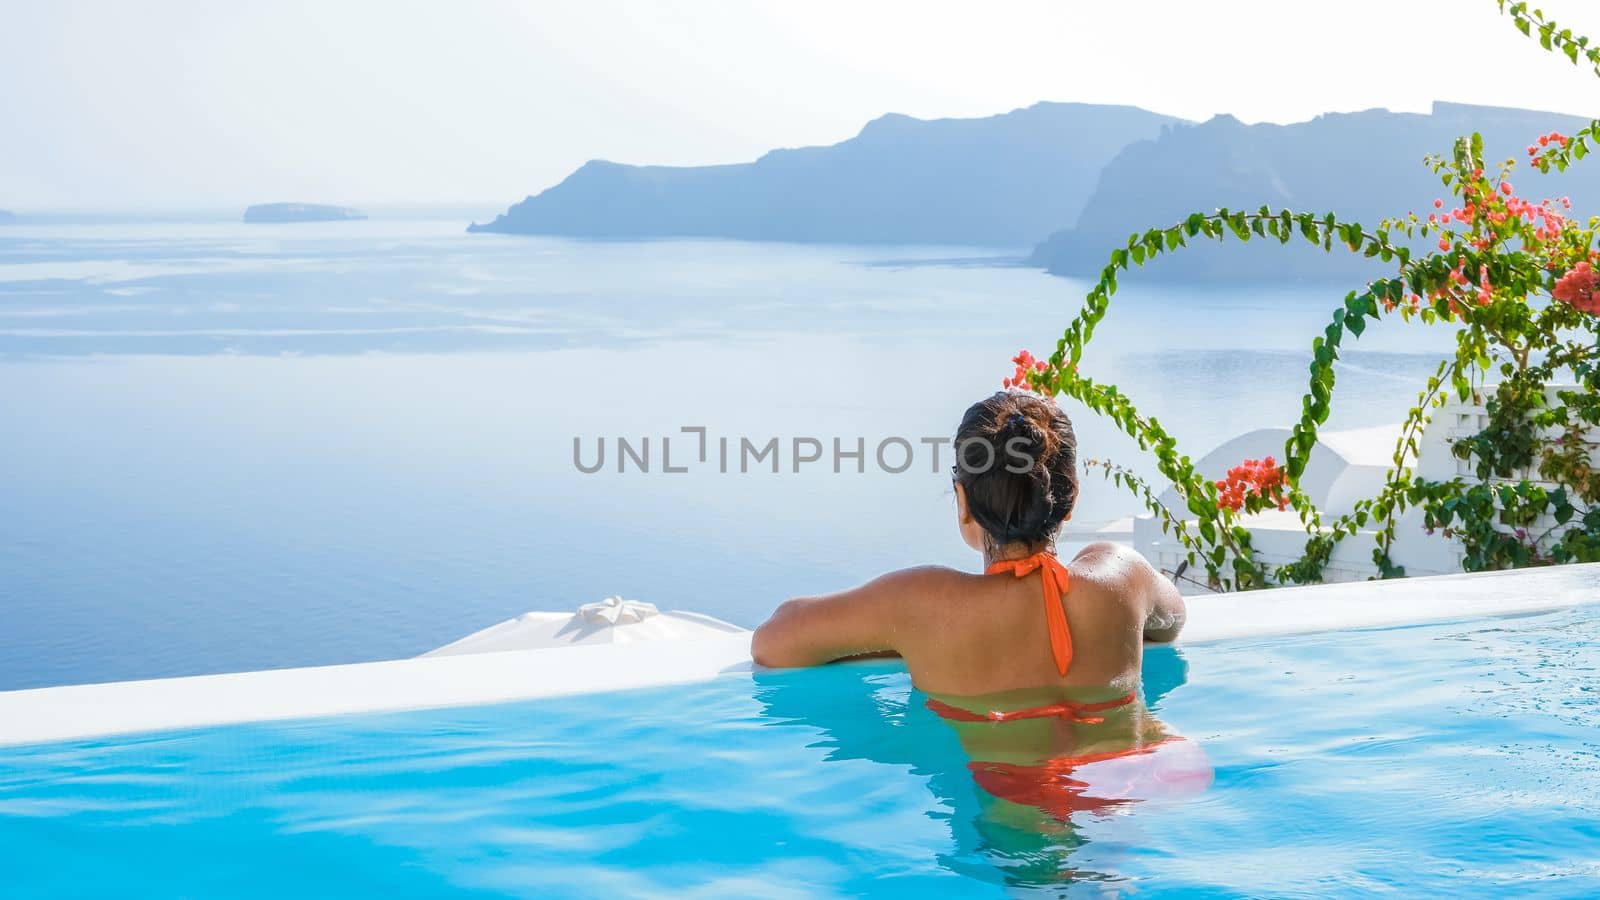 Young Asian women on vacation at Santorini swimming pool looking out over the Caldera ocean of Santorini, Oia Greece, Greek Island Aegean Cyclades.